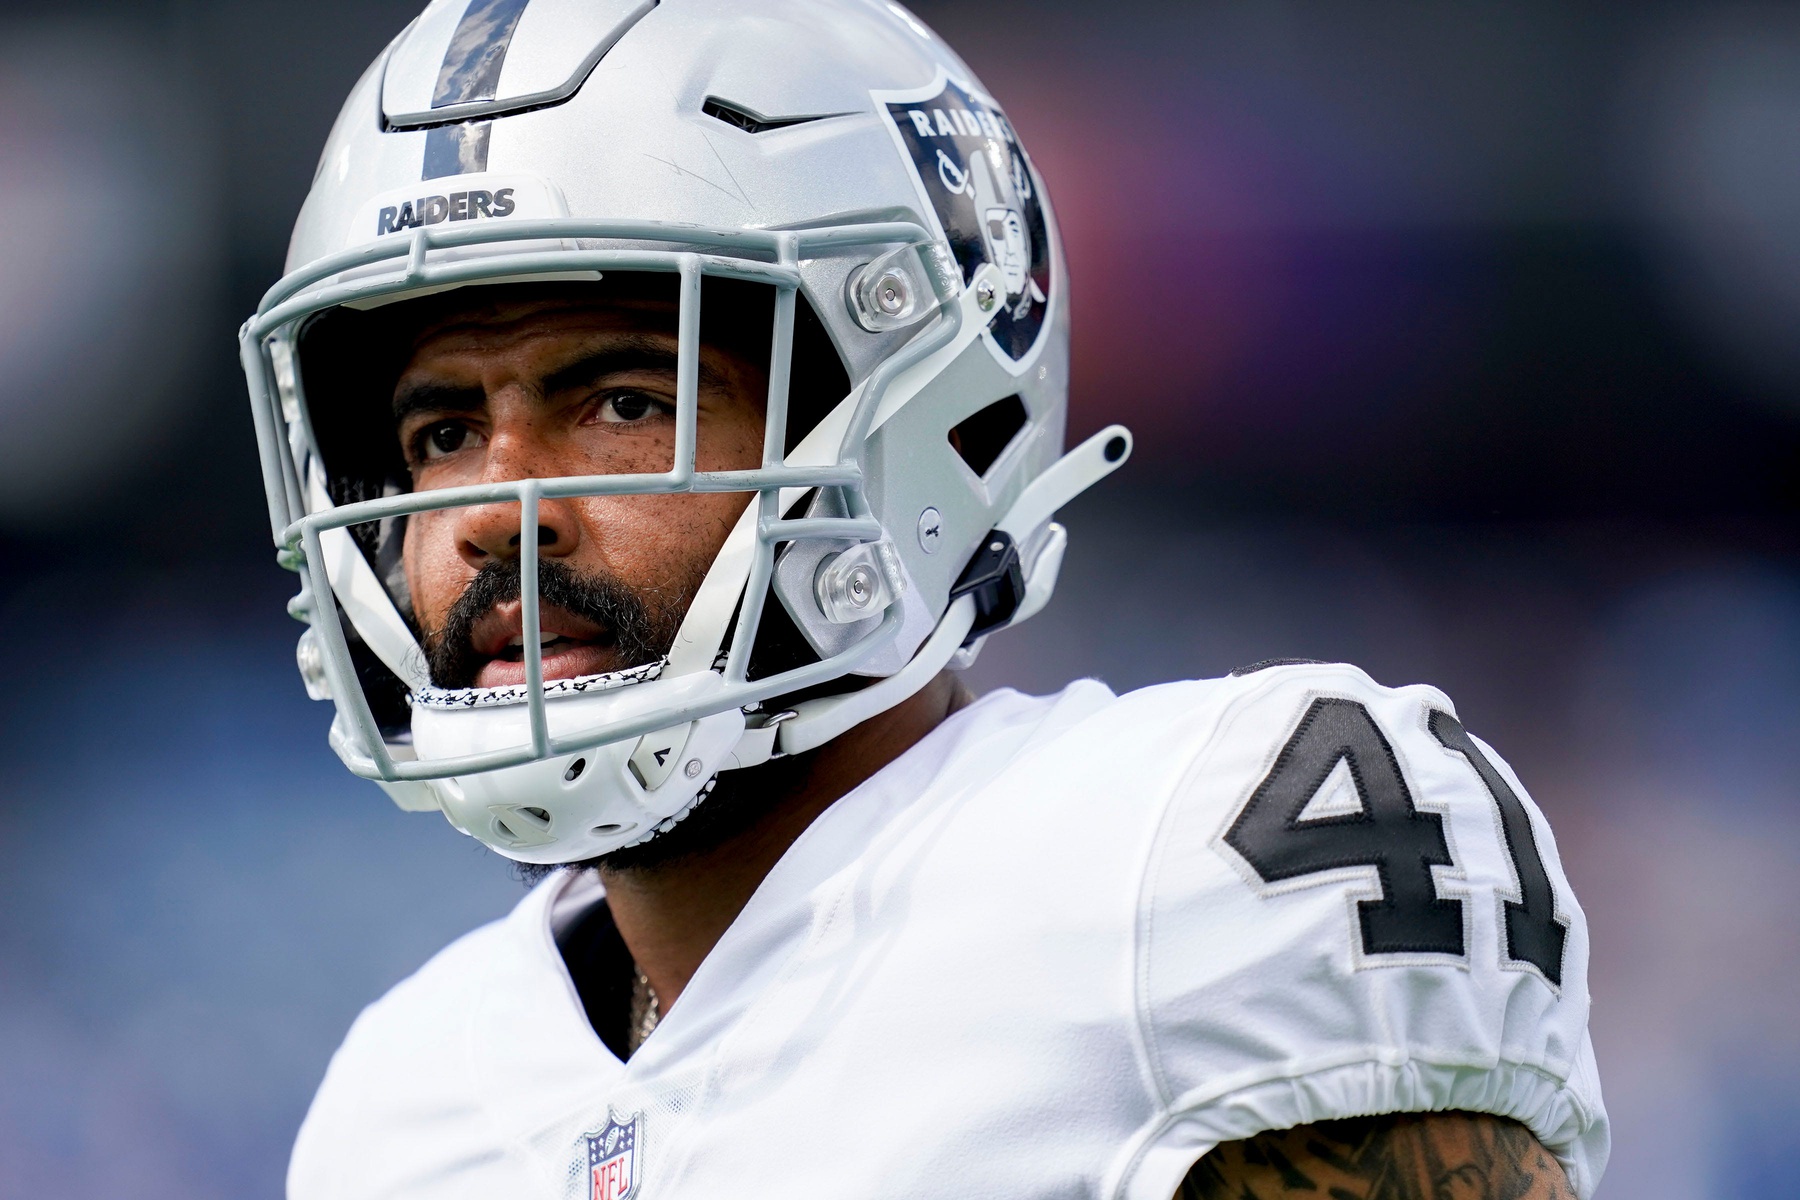 The Las Vegas Raiders added safety Matthias Farley to the active roster